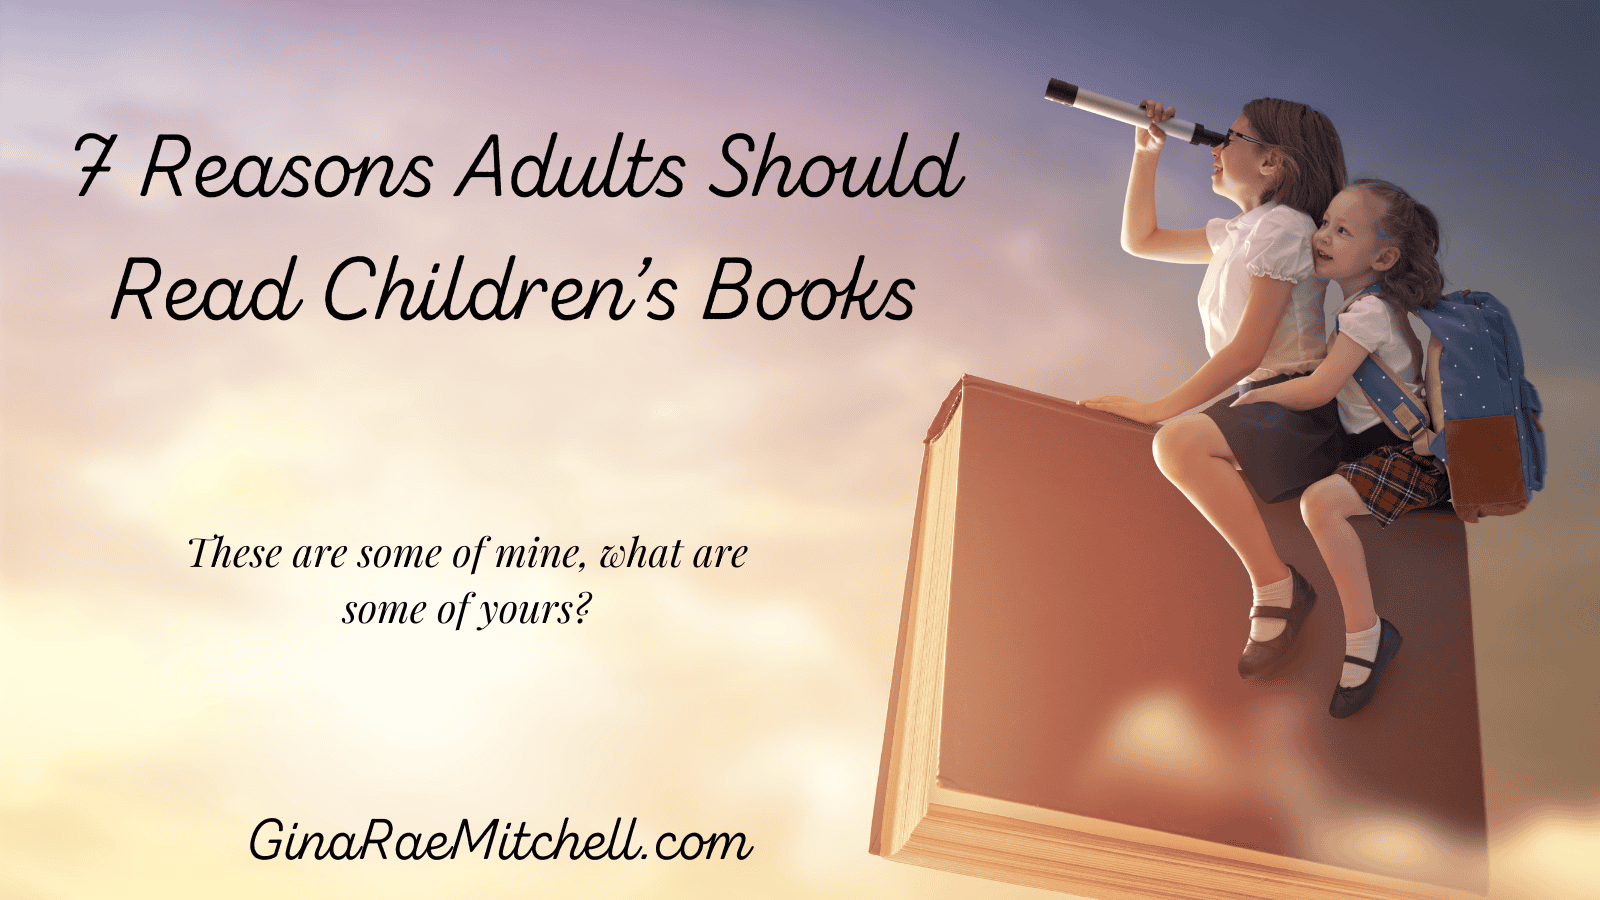 7 Reasons Adults Should Read Children's Books | #ChildrensBooks #BooksWithMessages #Books #Learning #Bookish #Adulting